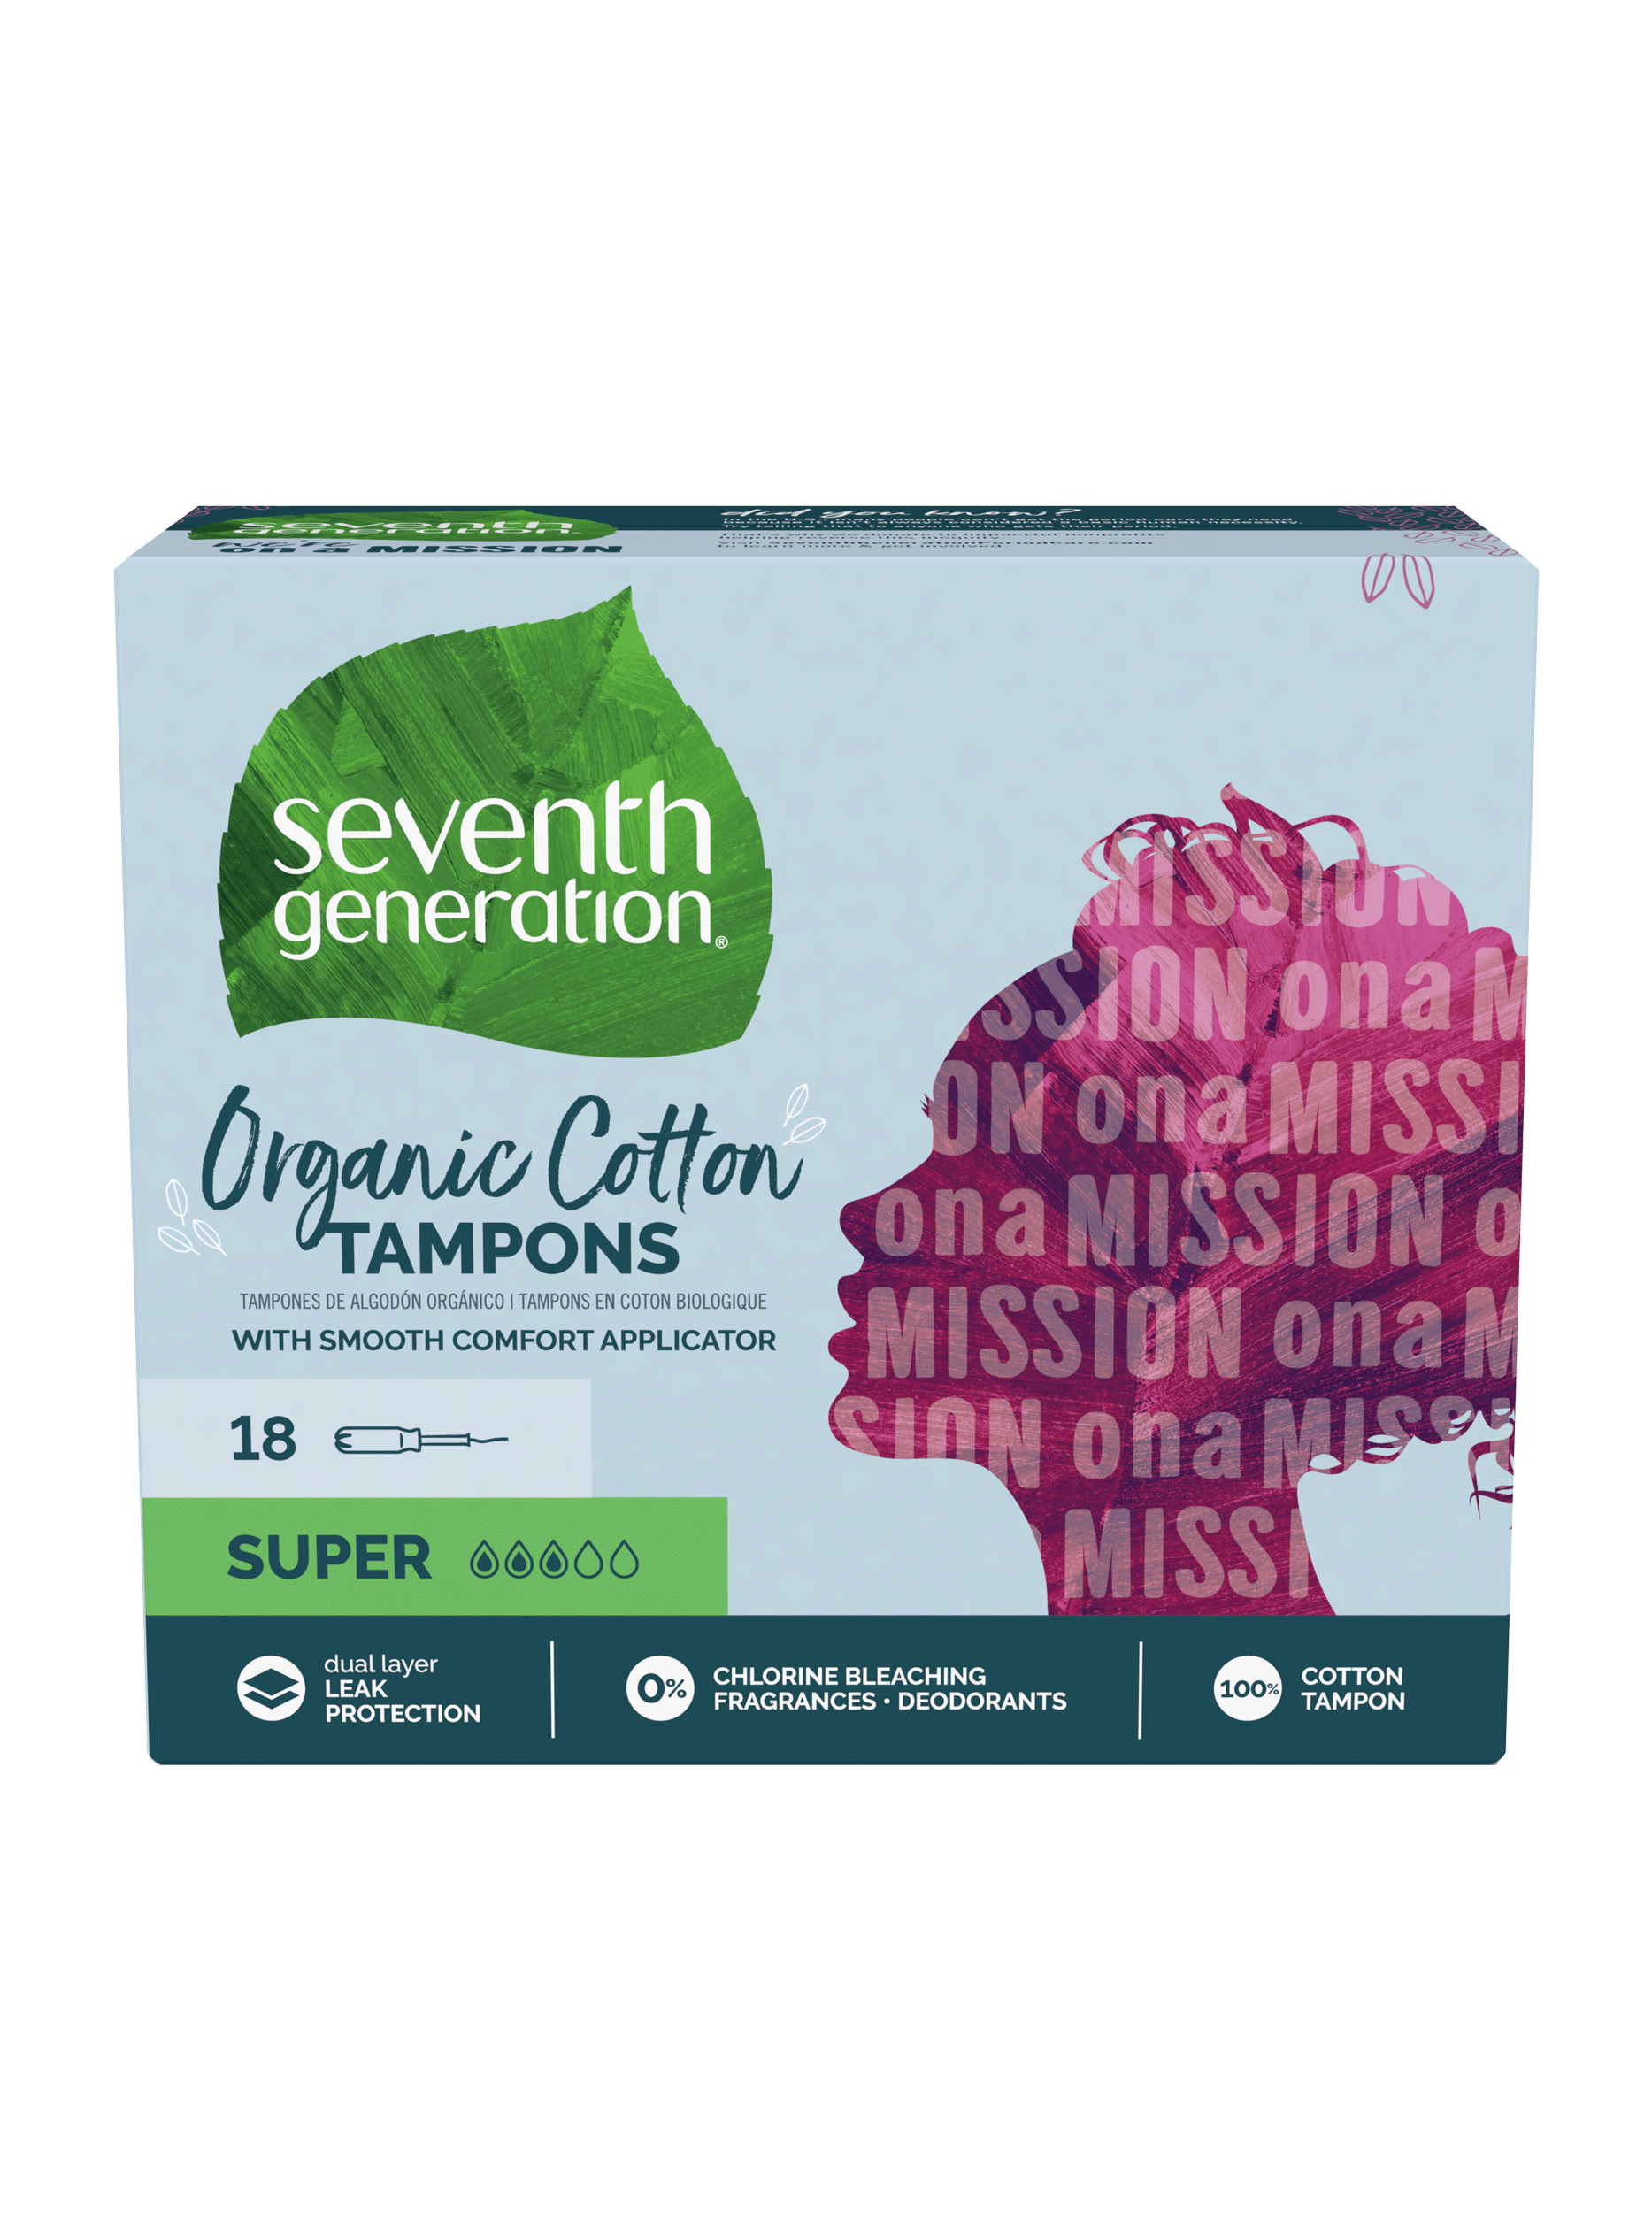 15 Best Organic Tampons in 2024 For A Safe & Non Toxic Period